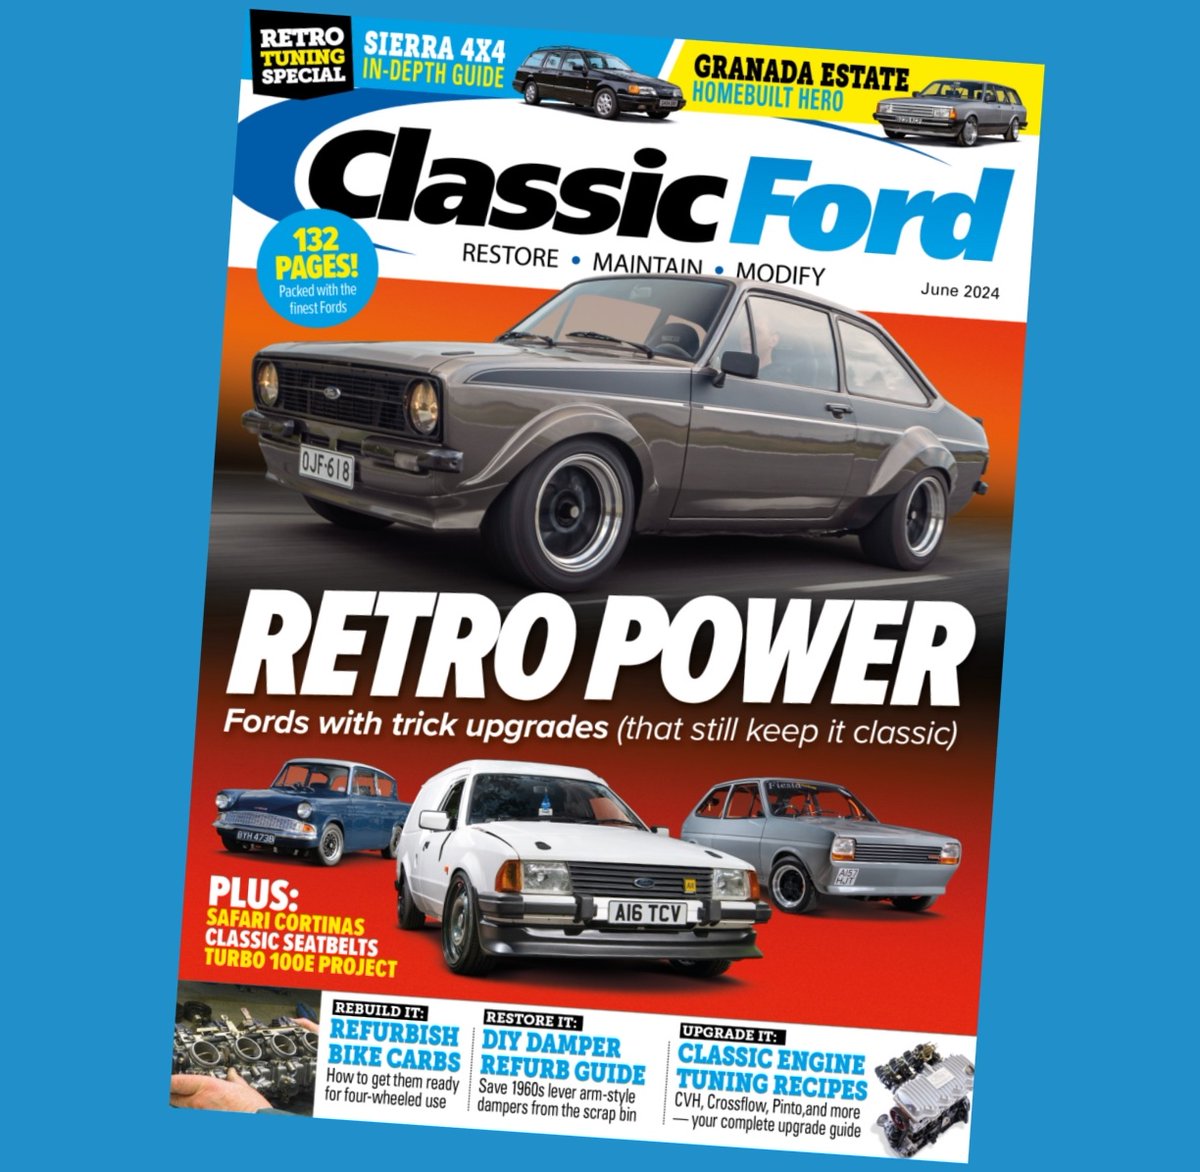 Built with lessons learned from sportsbikes, Dean Cutler's Mk1 Fiesta travels through the air like a Teflon butterfly thanks to super-smooth bodywork. Get the lowdown on this clever creation in the June issue - find stockists/order direct here 👉 linktr.ee/classicford